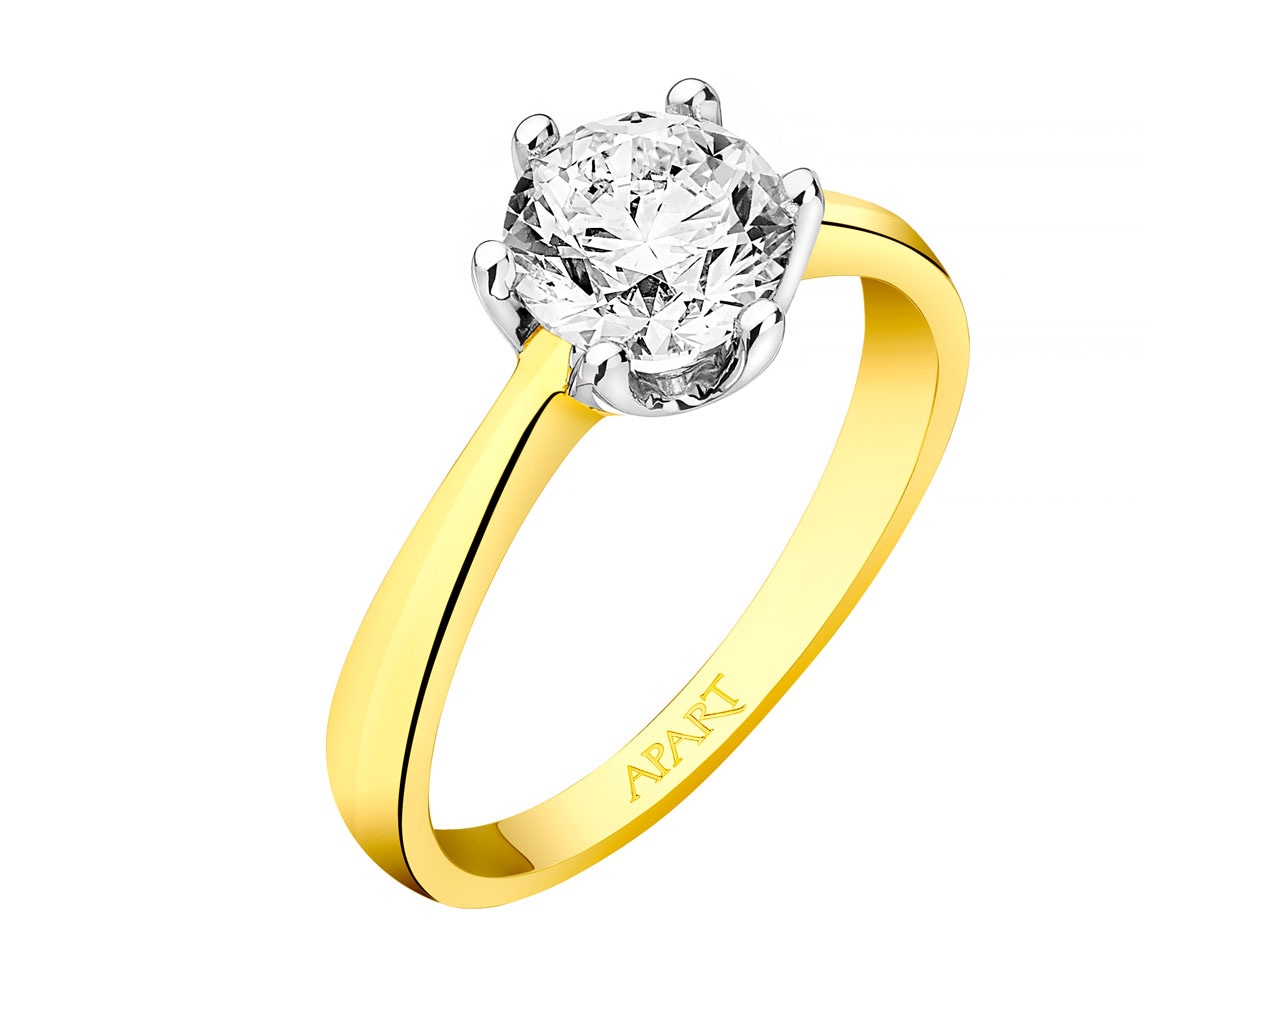 14ct Yellow Gold Ring with Diamond 1,50 ct - fineness 14 K